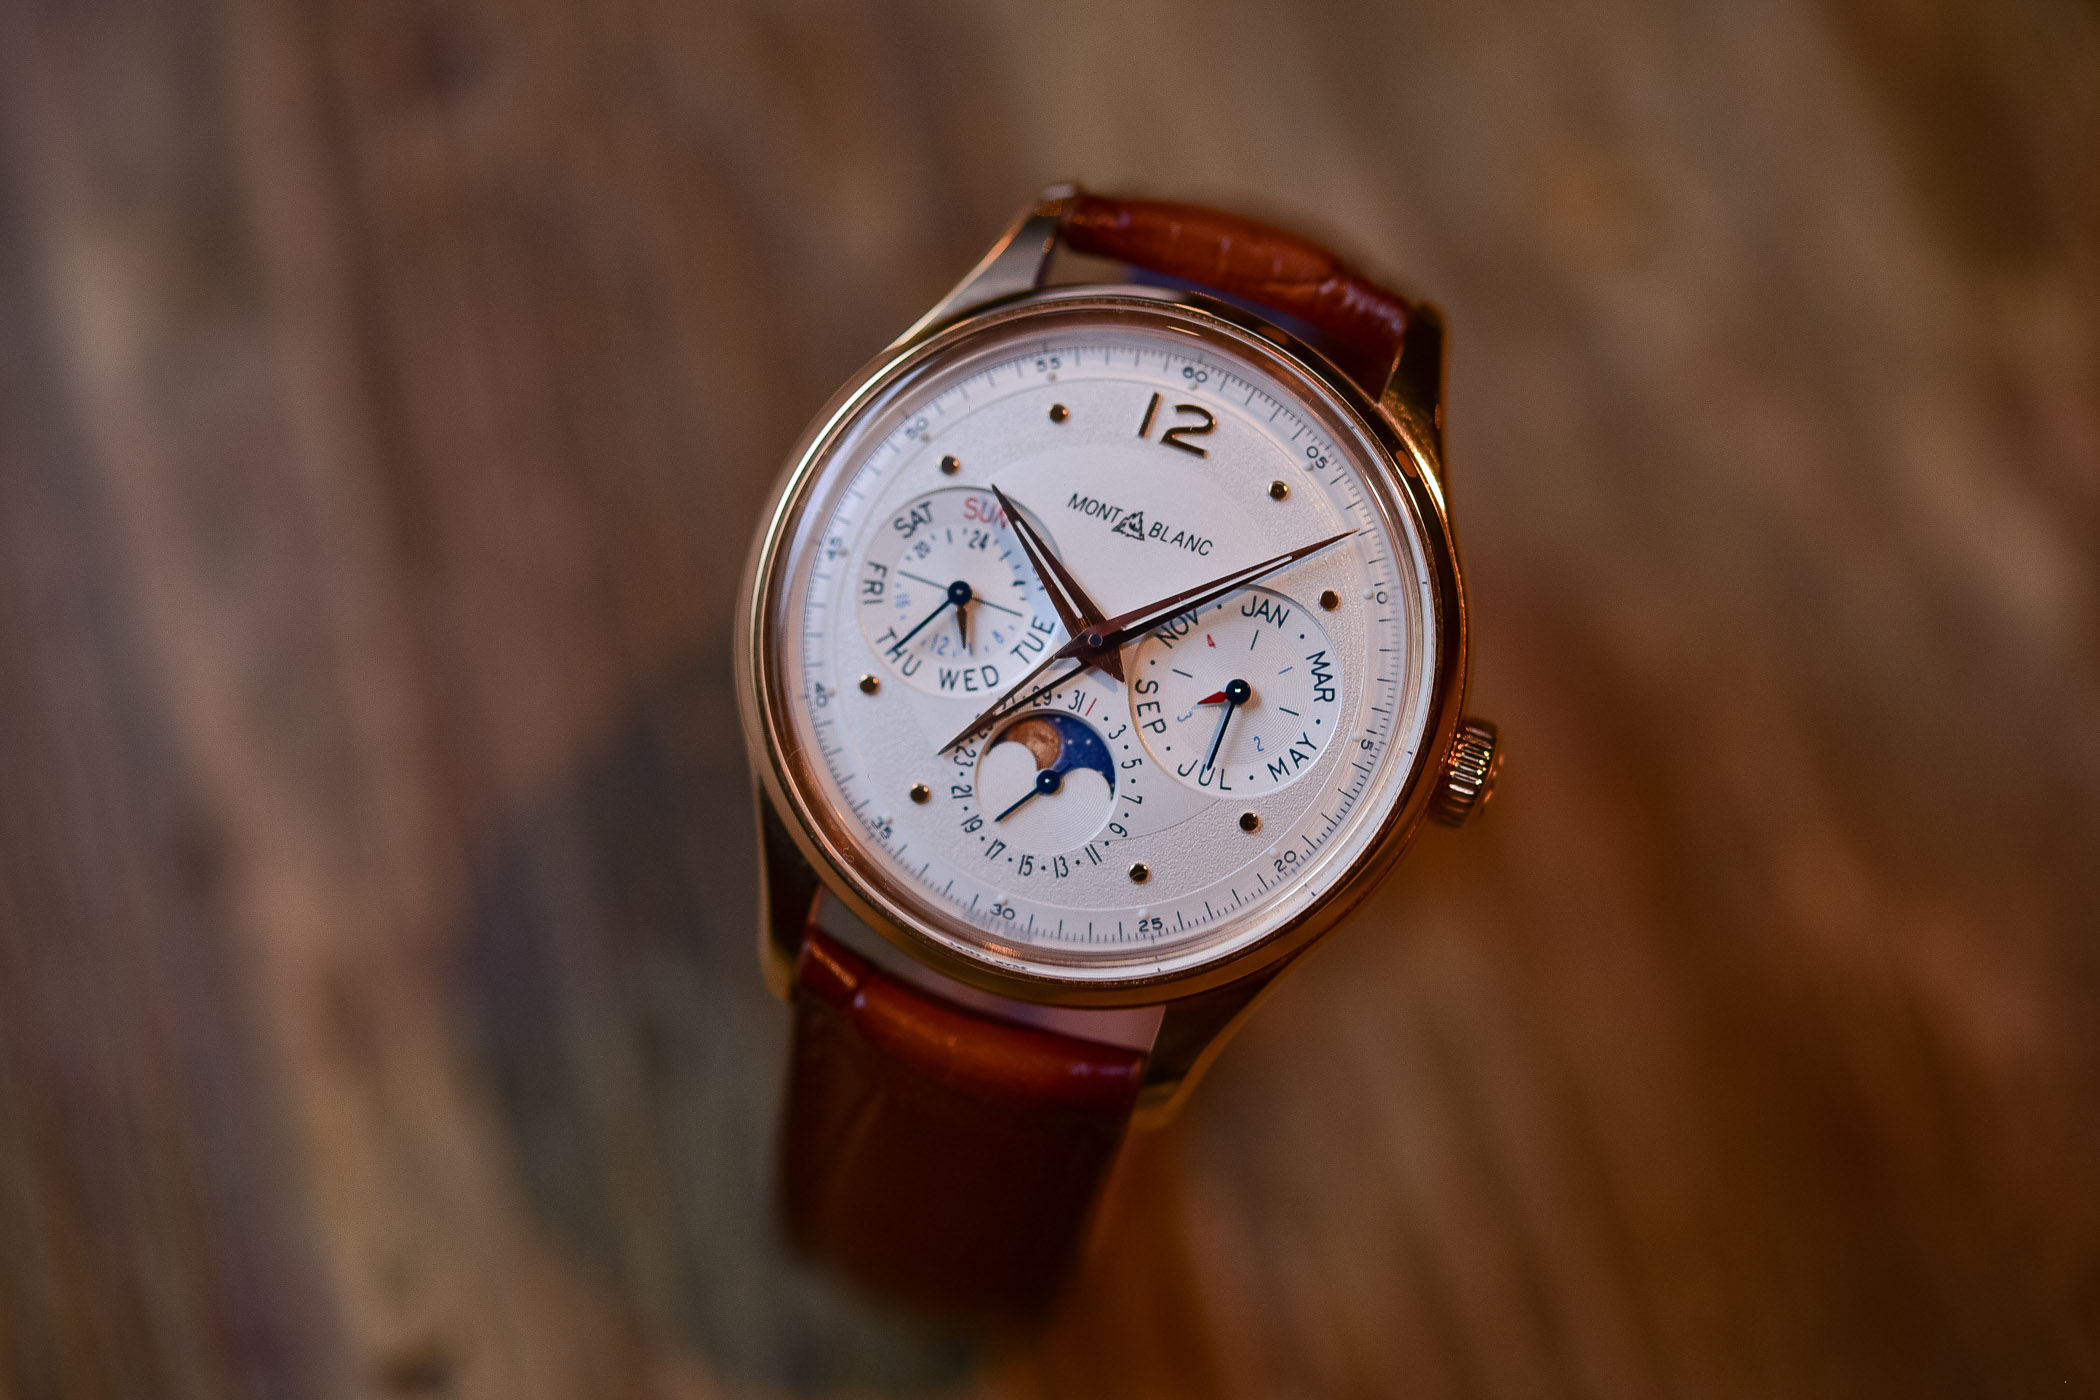 Montblanc Heritage Manufacture Perpetual Calendar LE100 - SIHH 2019